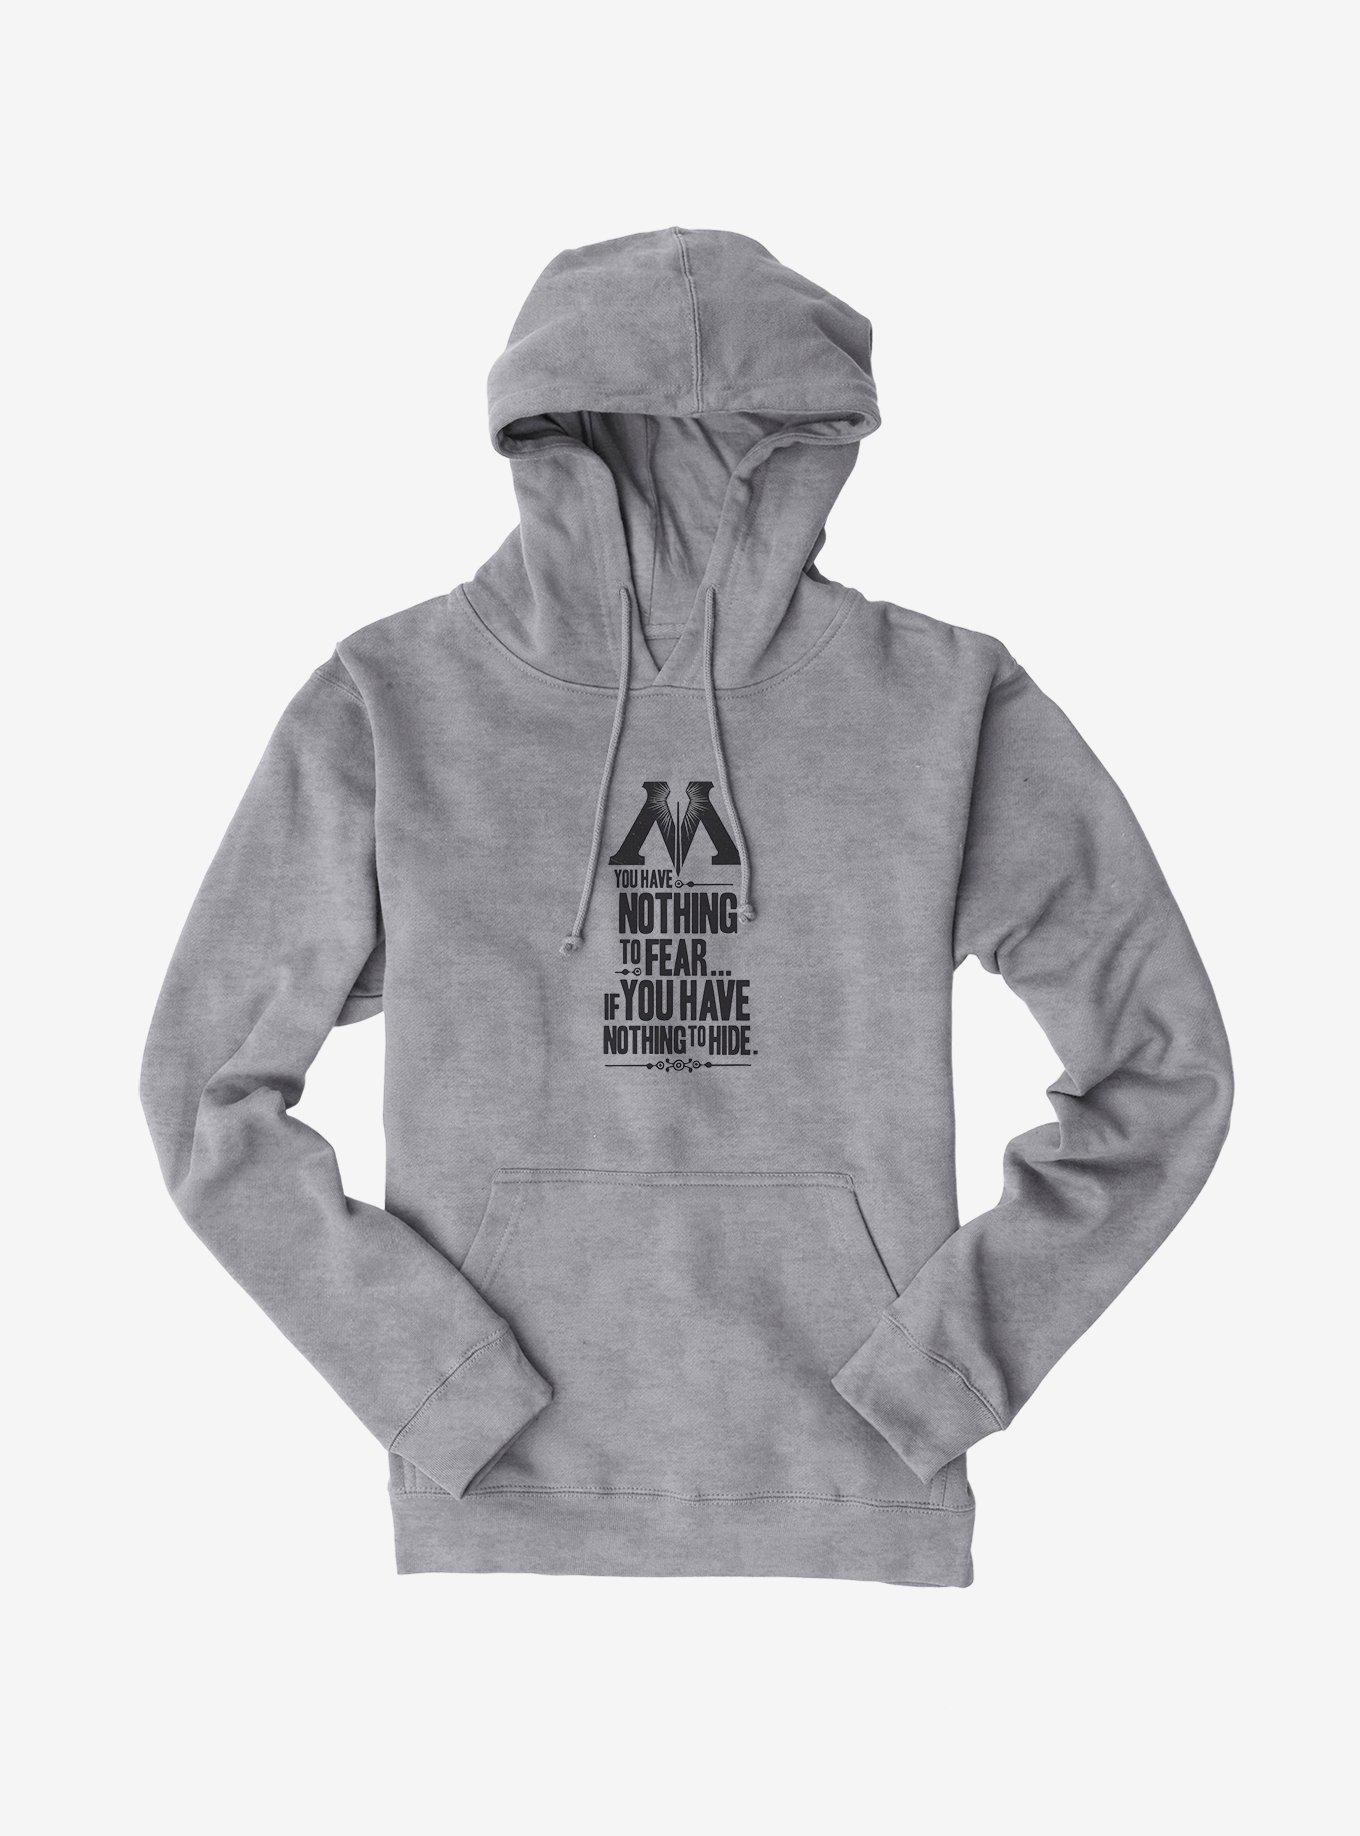 Harry Potter Nothing To Fear Nothing To Hide Hoodie, HEATHER GREY, hi-res